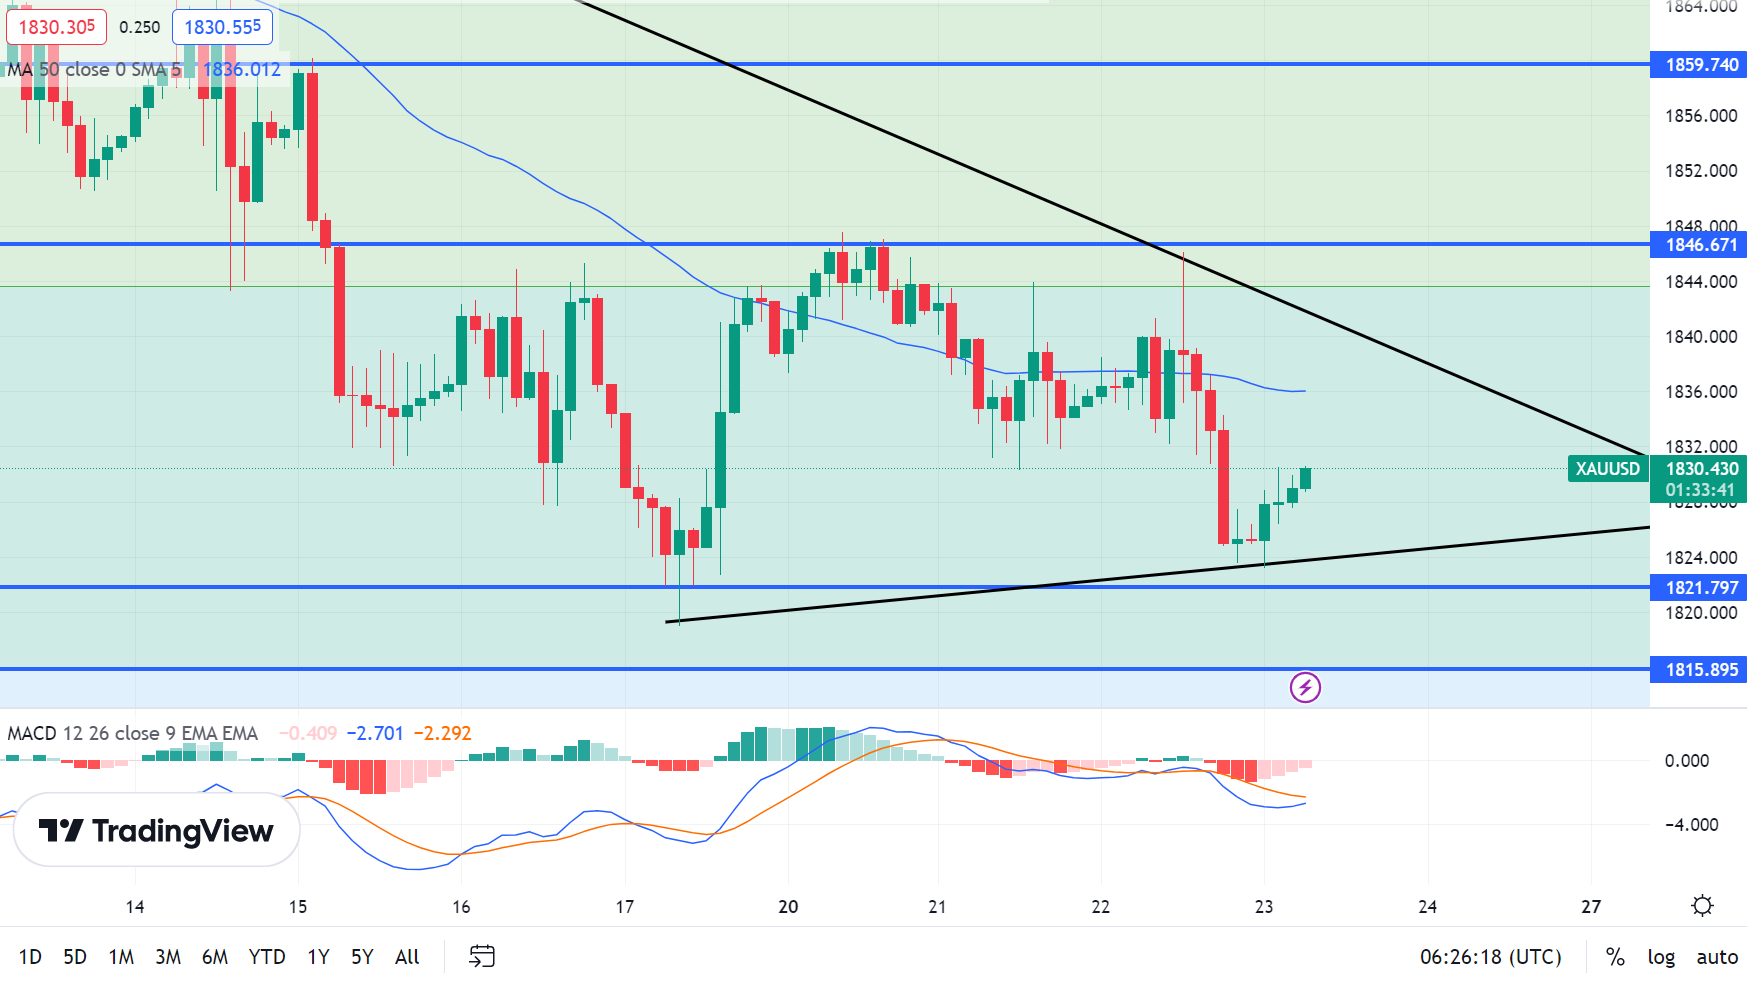  Gold Price Chart - Source: Tradingview